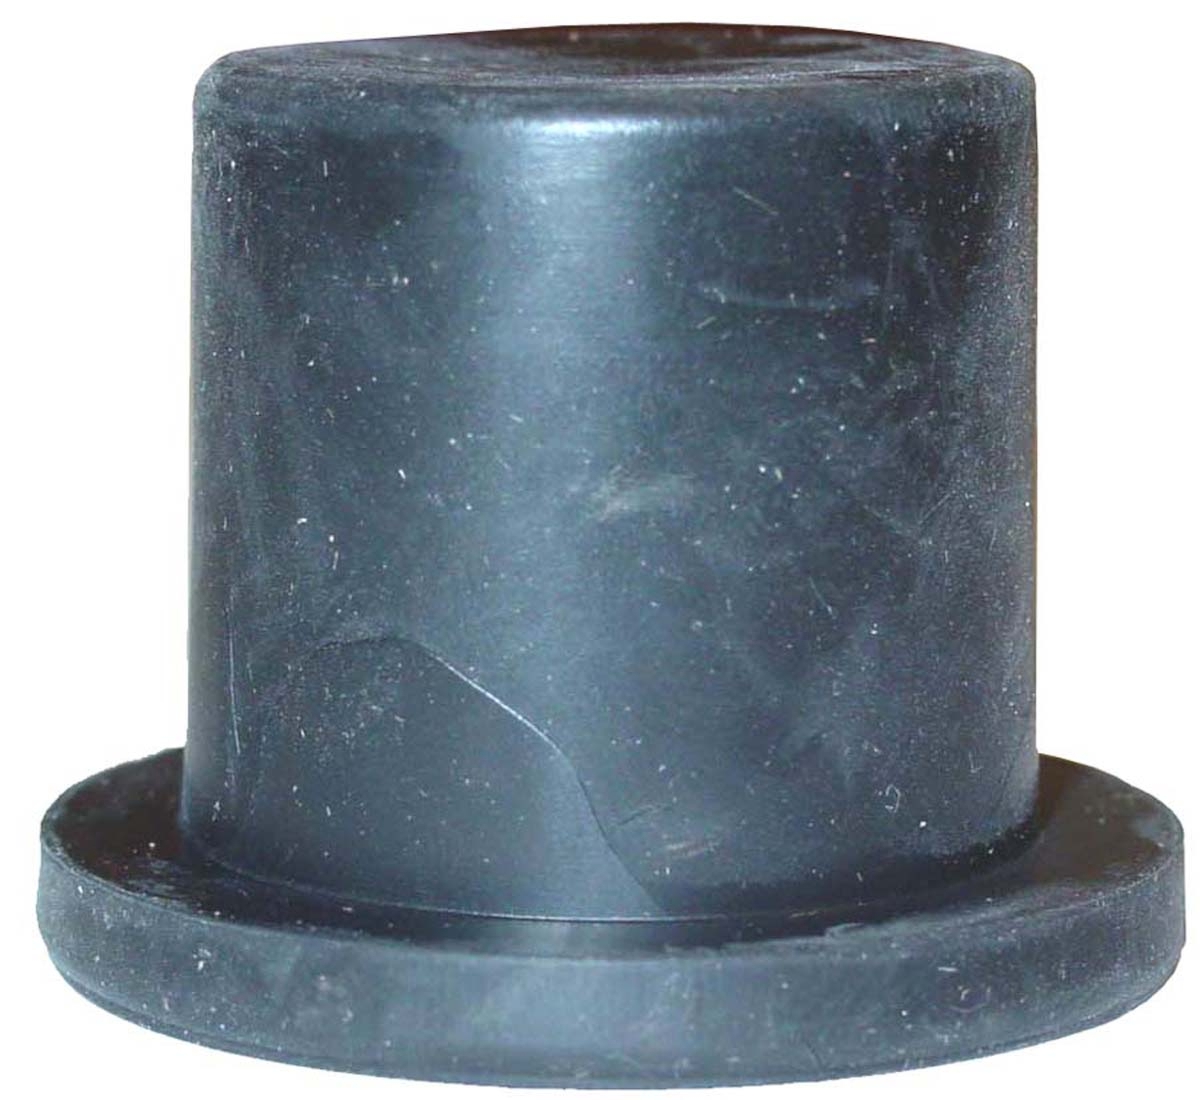 RUBBER BUSHING (TALL) FOR BATTERY BOX LIDS